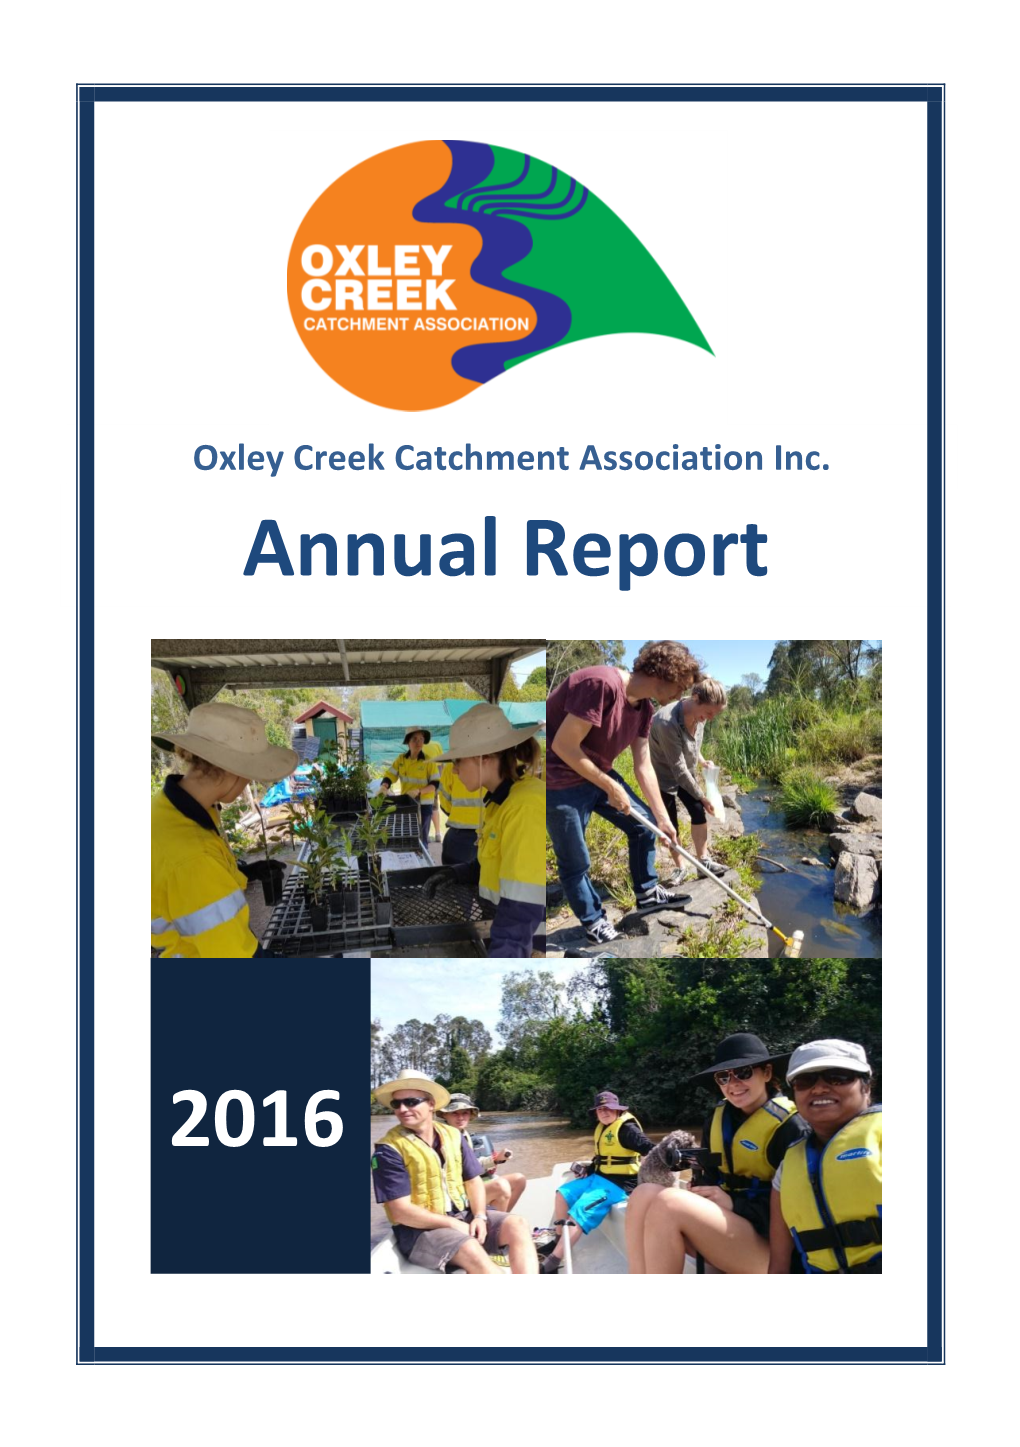 Oxley Creek Catchment Association Inc. Annual Report 2016